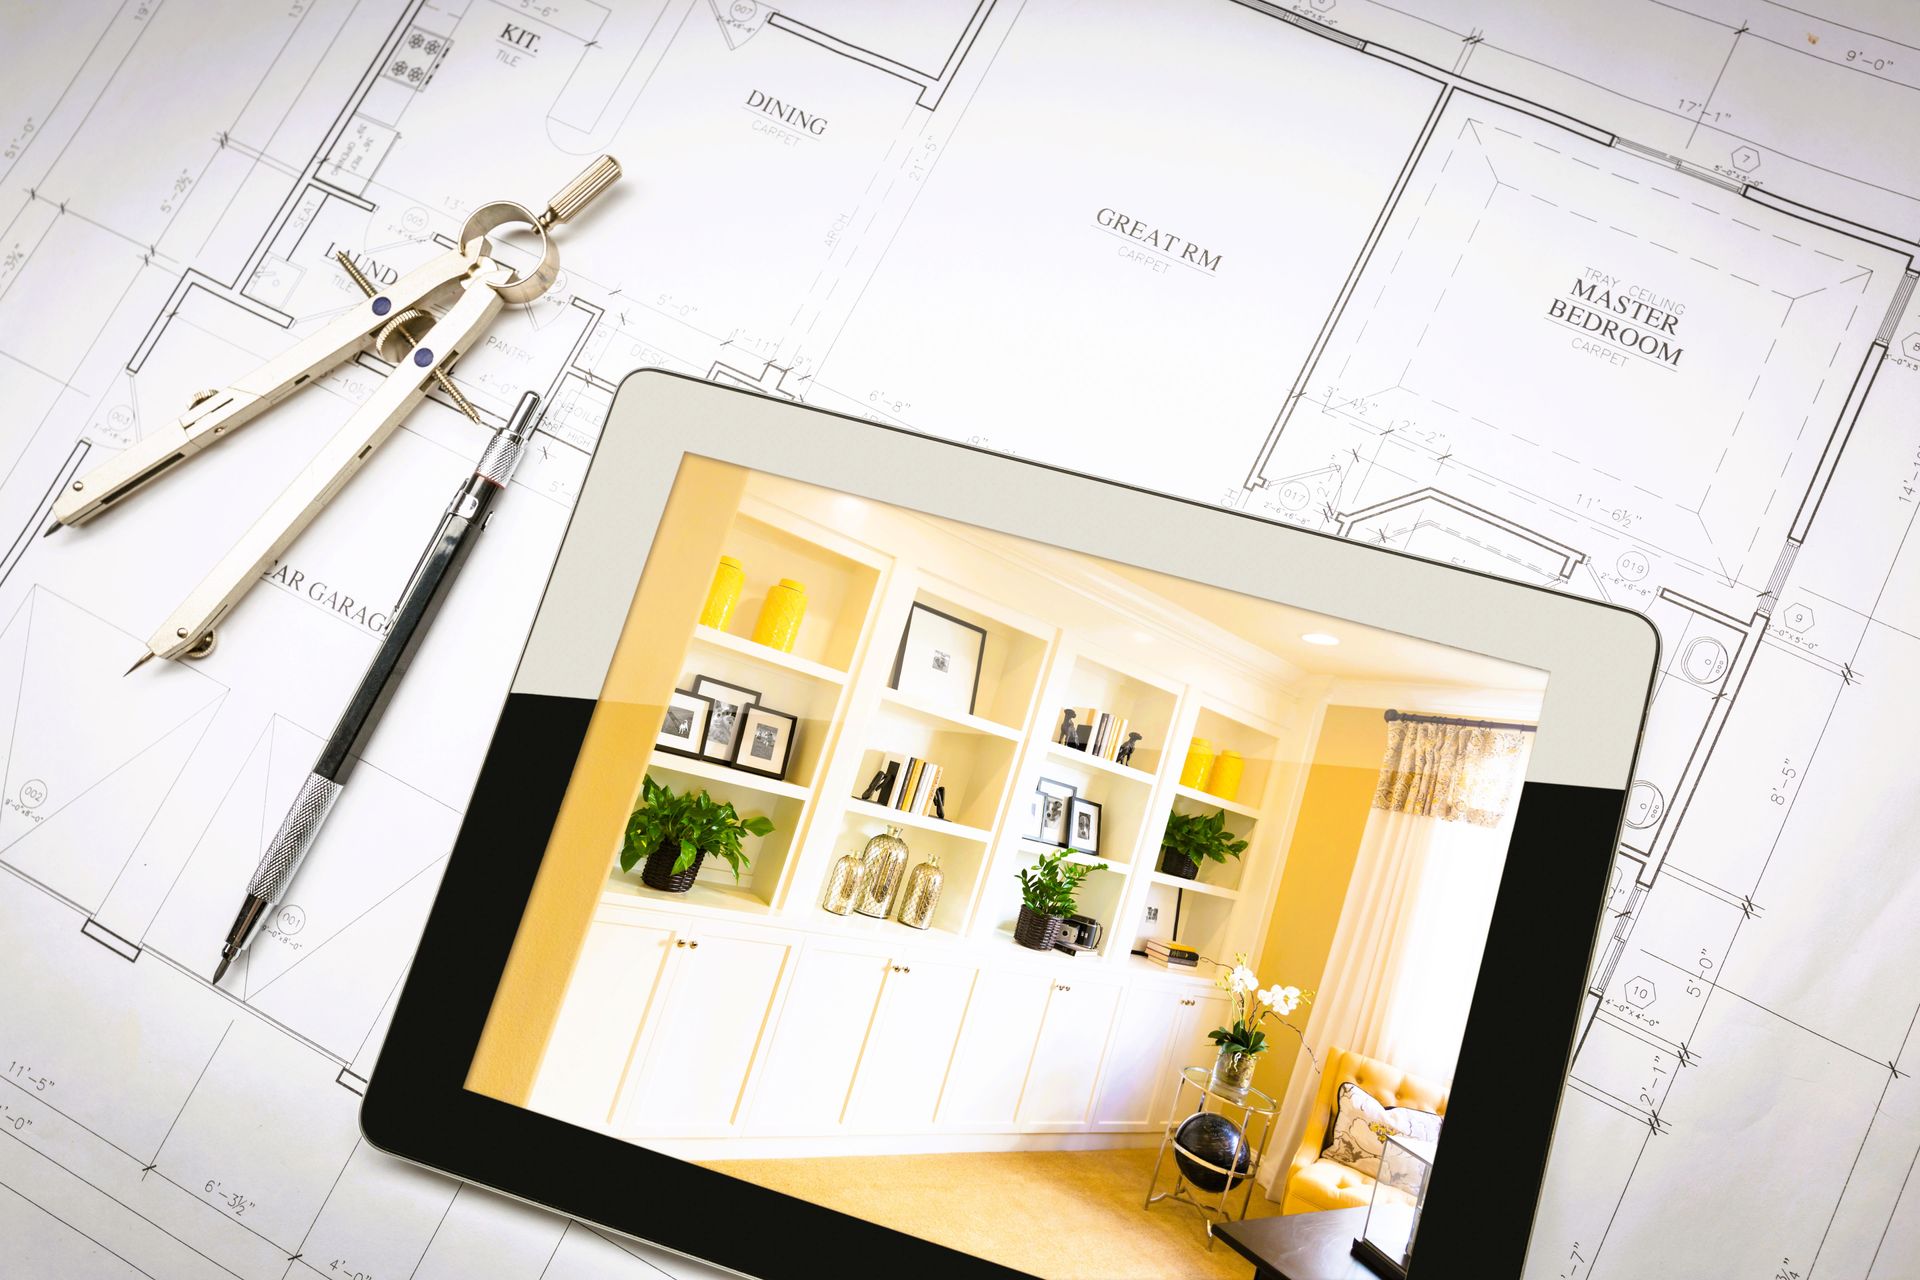 A tablet with home remodeling apps open, placed next to blueprints on a table.